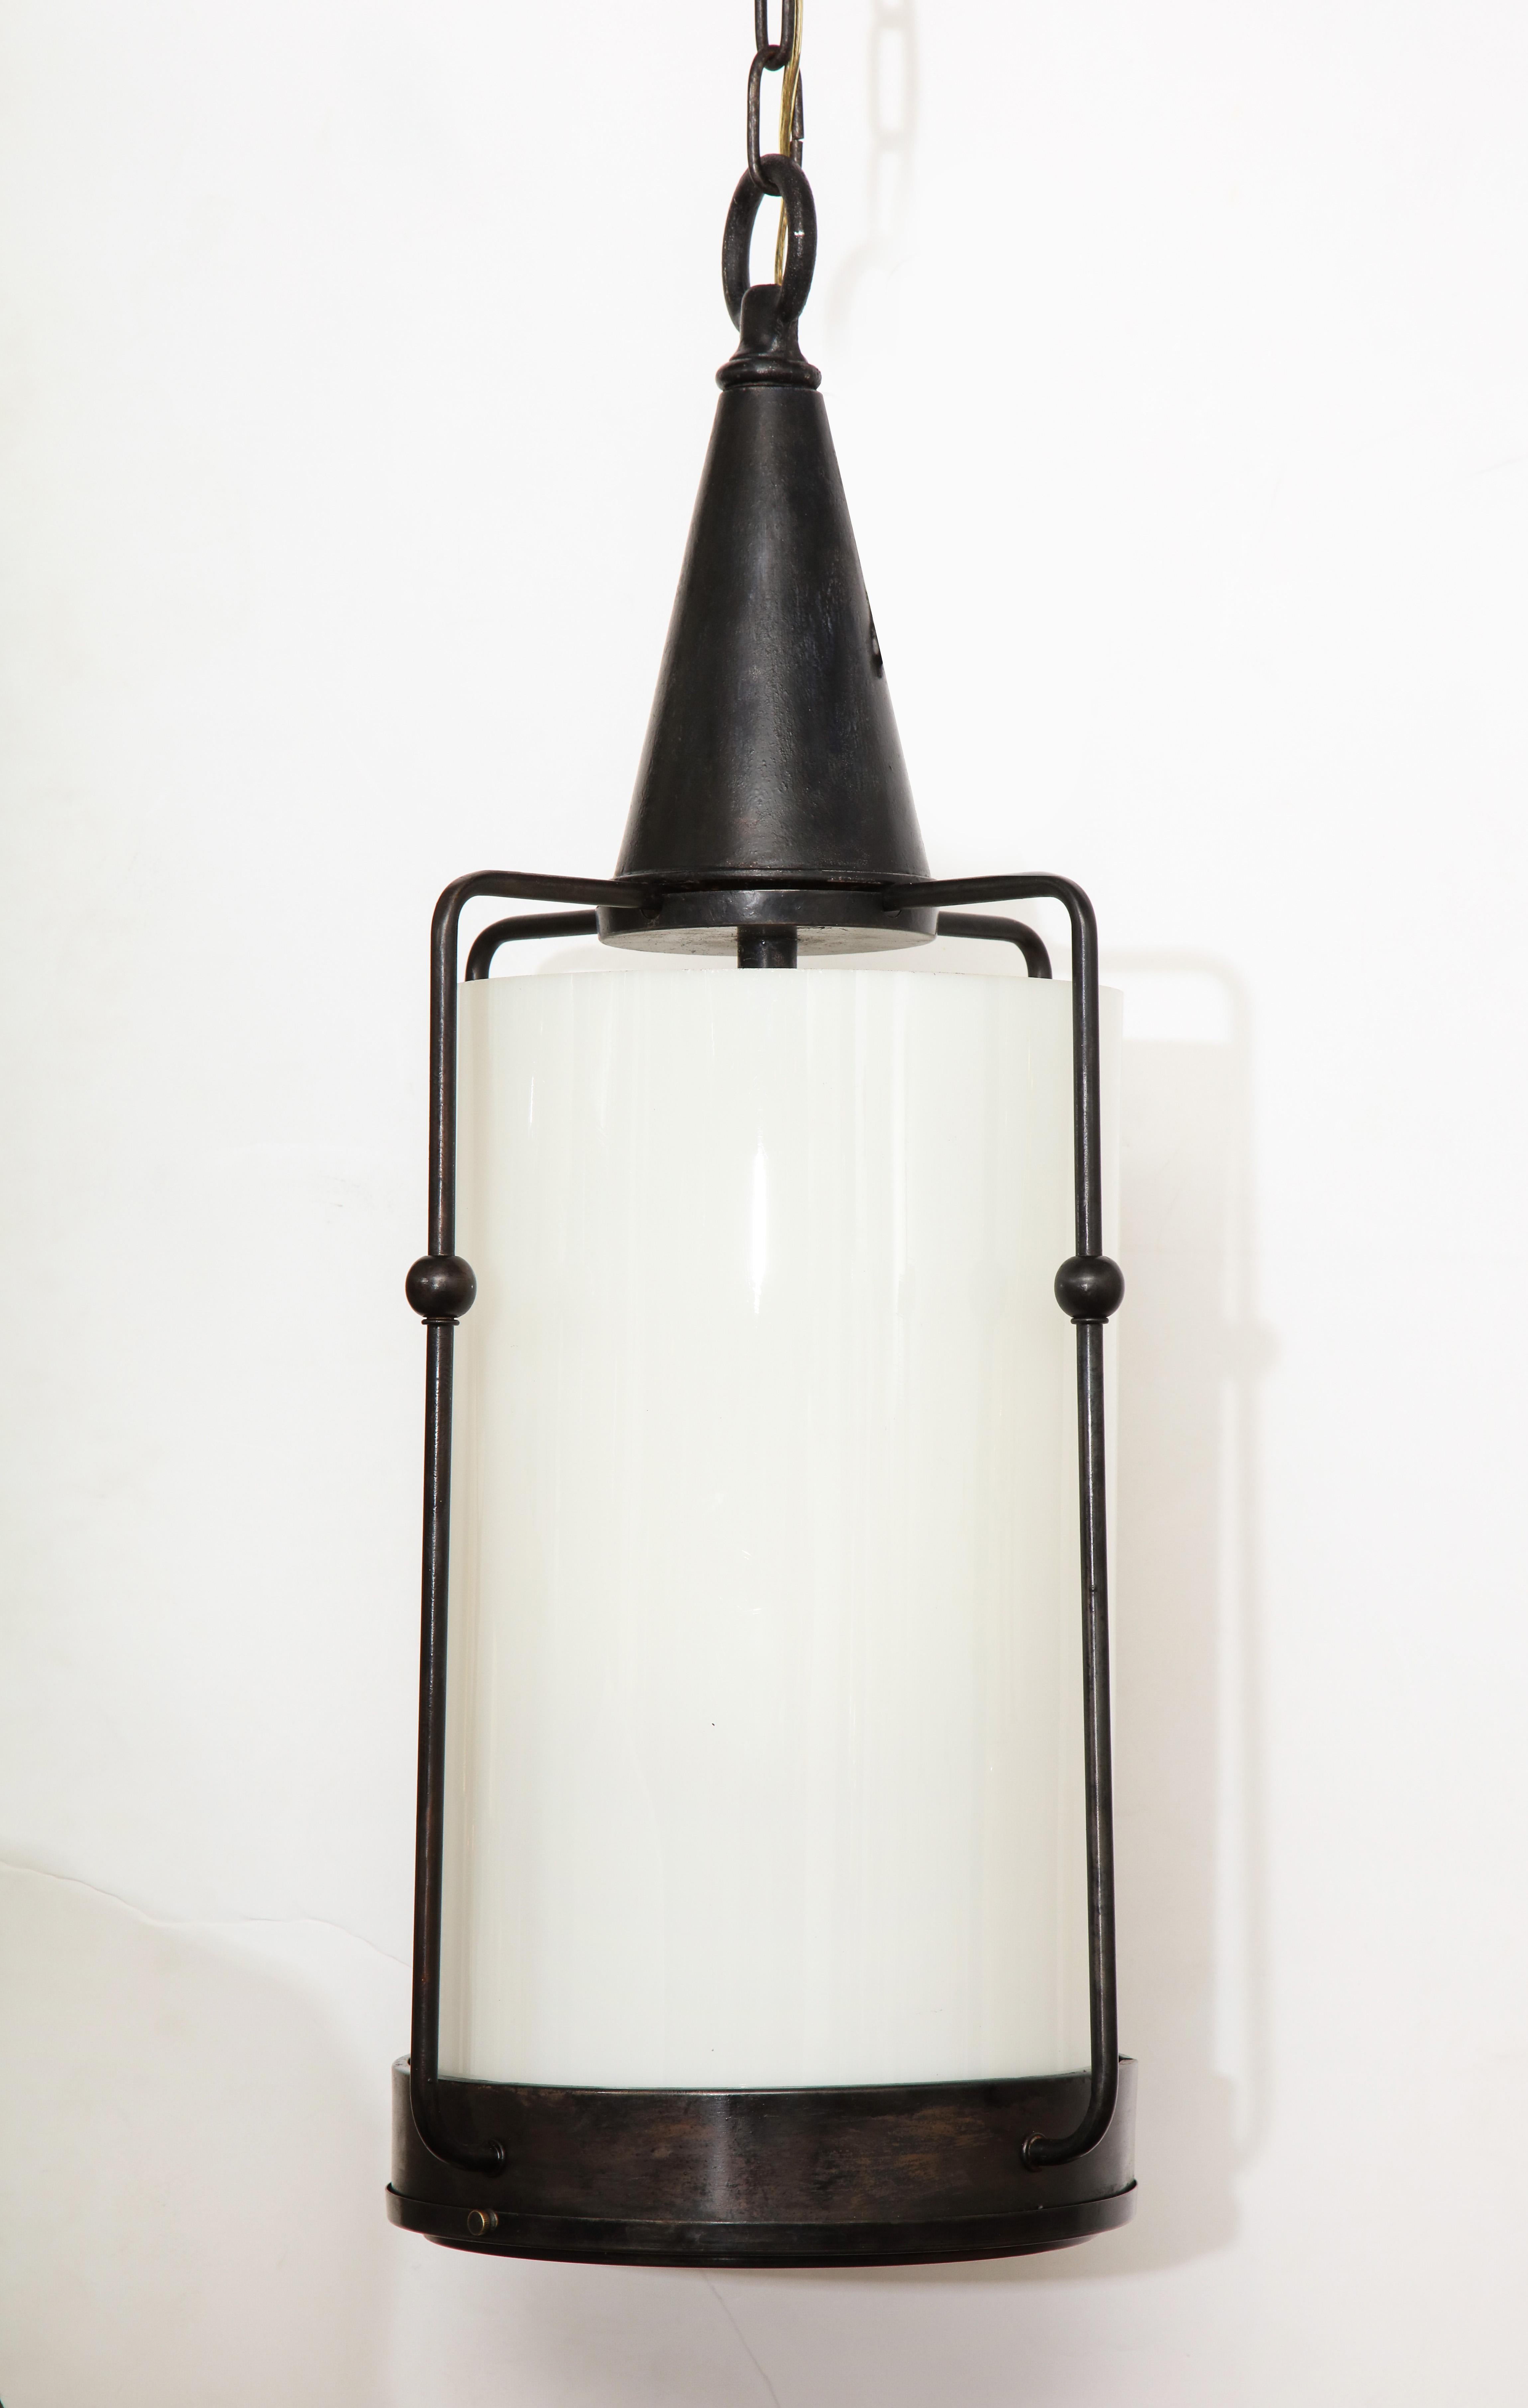 Arts & Crafts bronze lantern with thick white milk glass diffuser. Rewired for use in the USA, uses 4 candelabra type bulbs.

Measures: Length with chain is 57 inches.